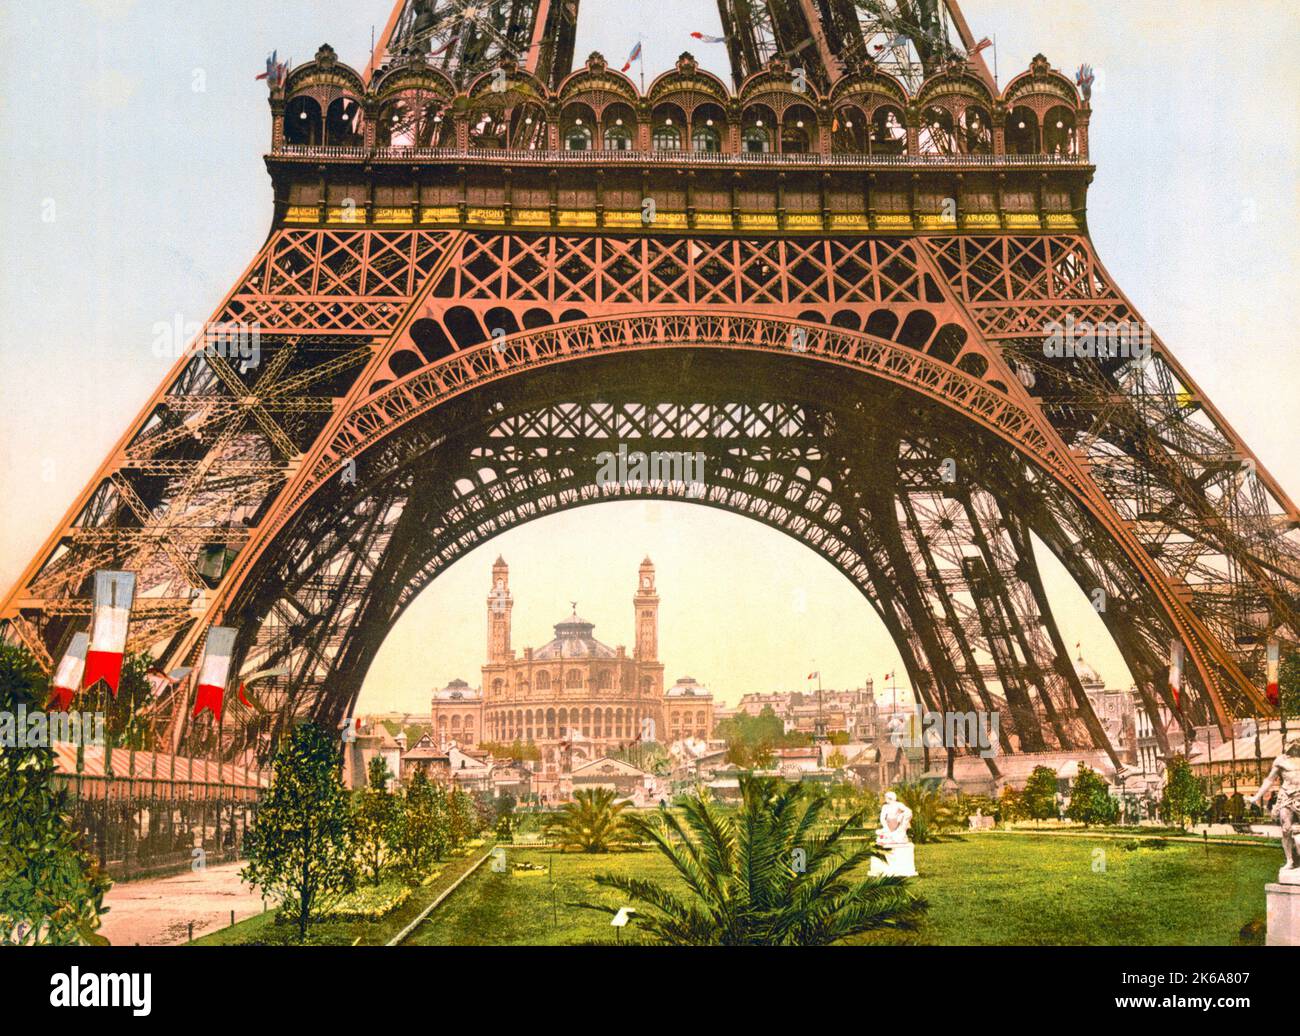 The Eiffel Tower and the Trocadero in Paris, France. Stock Photo